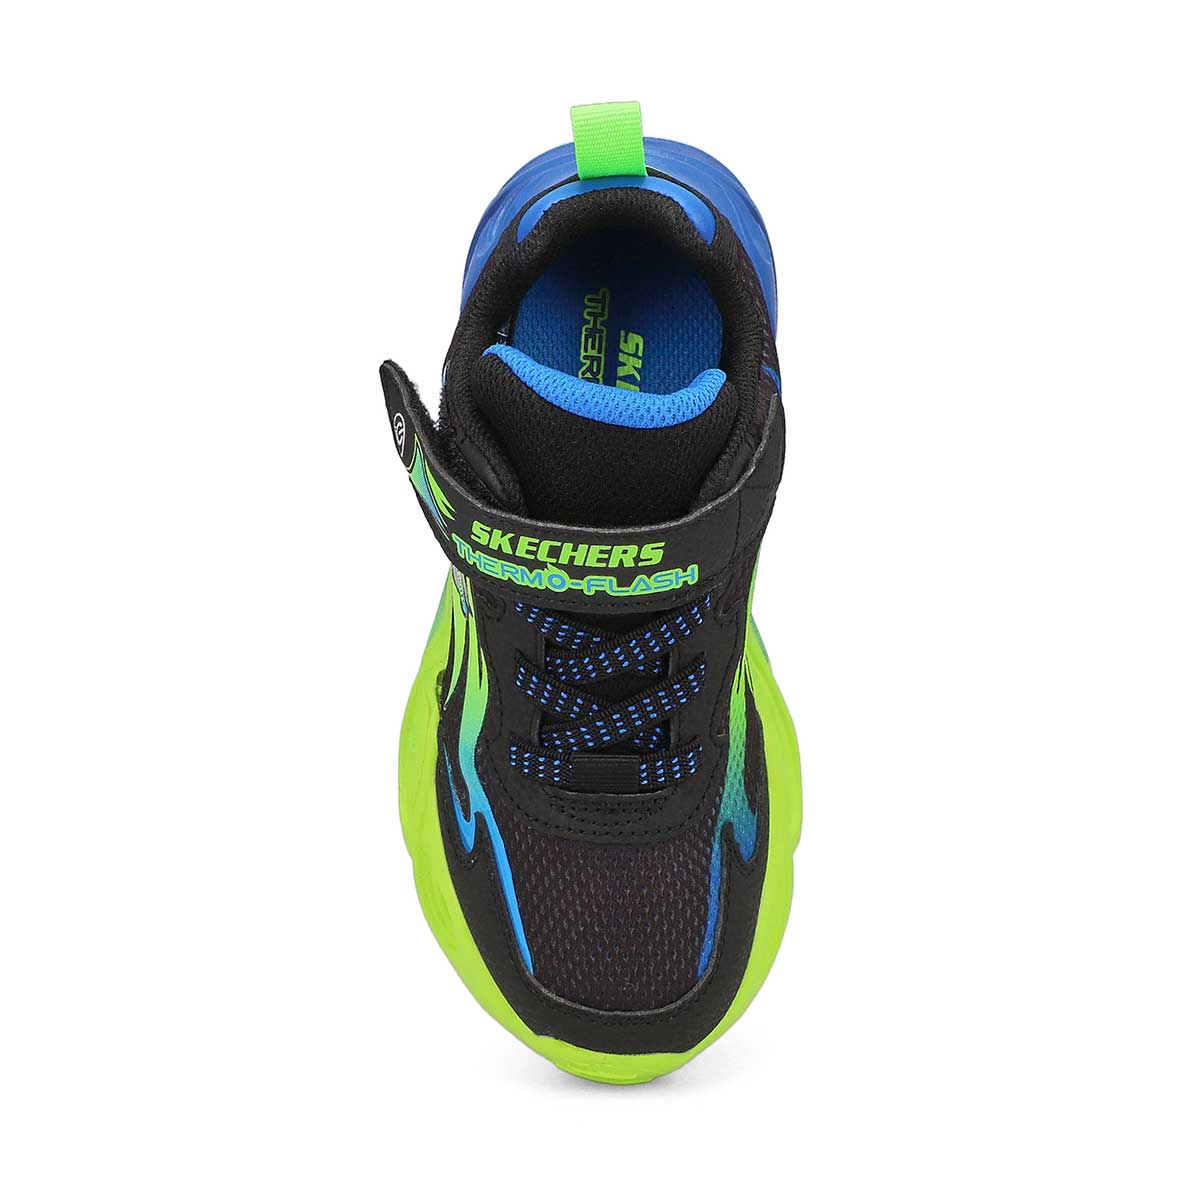 Boys' Thermo-Flash Heat-Flux Light Up Sneaker - Black/Lime